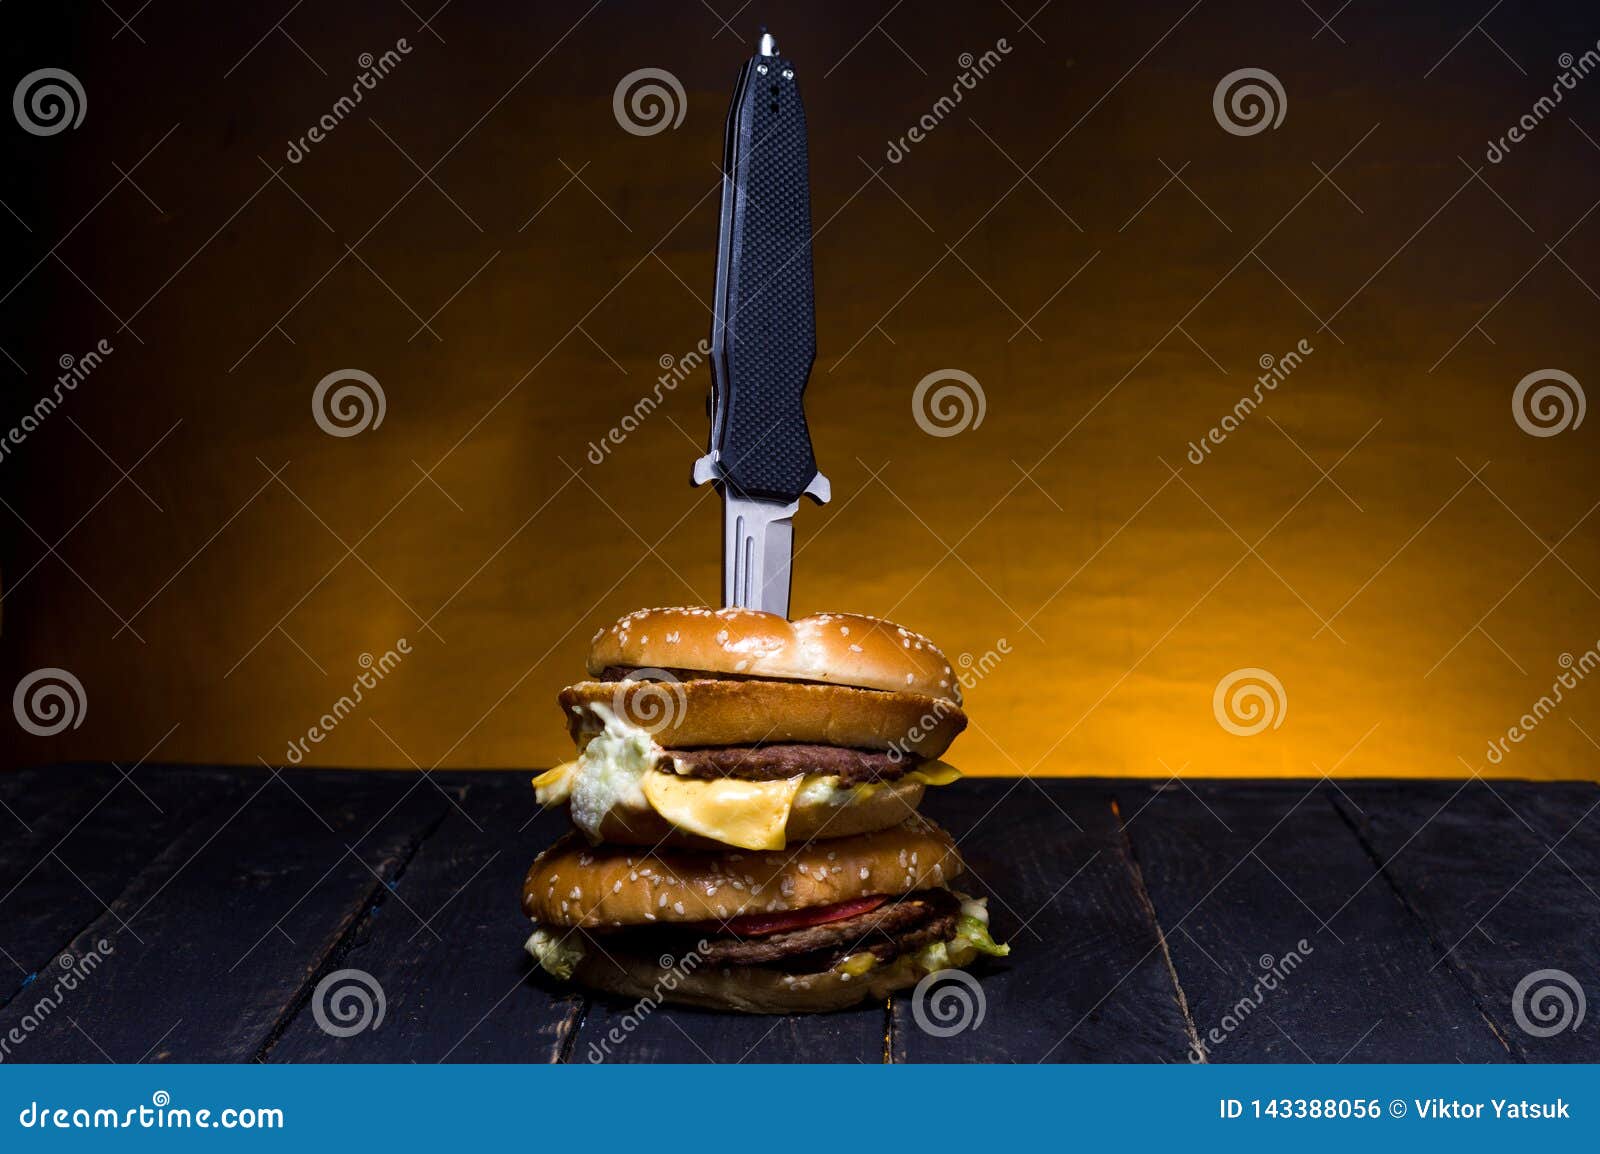 a pocket knife in a burger. folding knife and burger